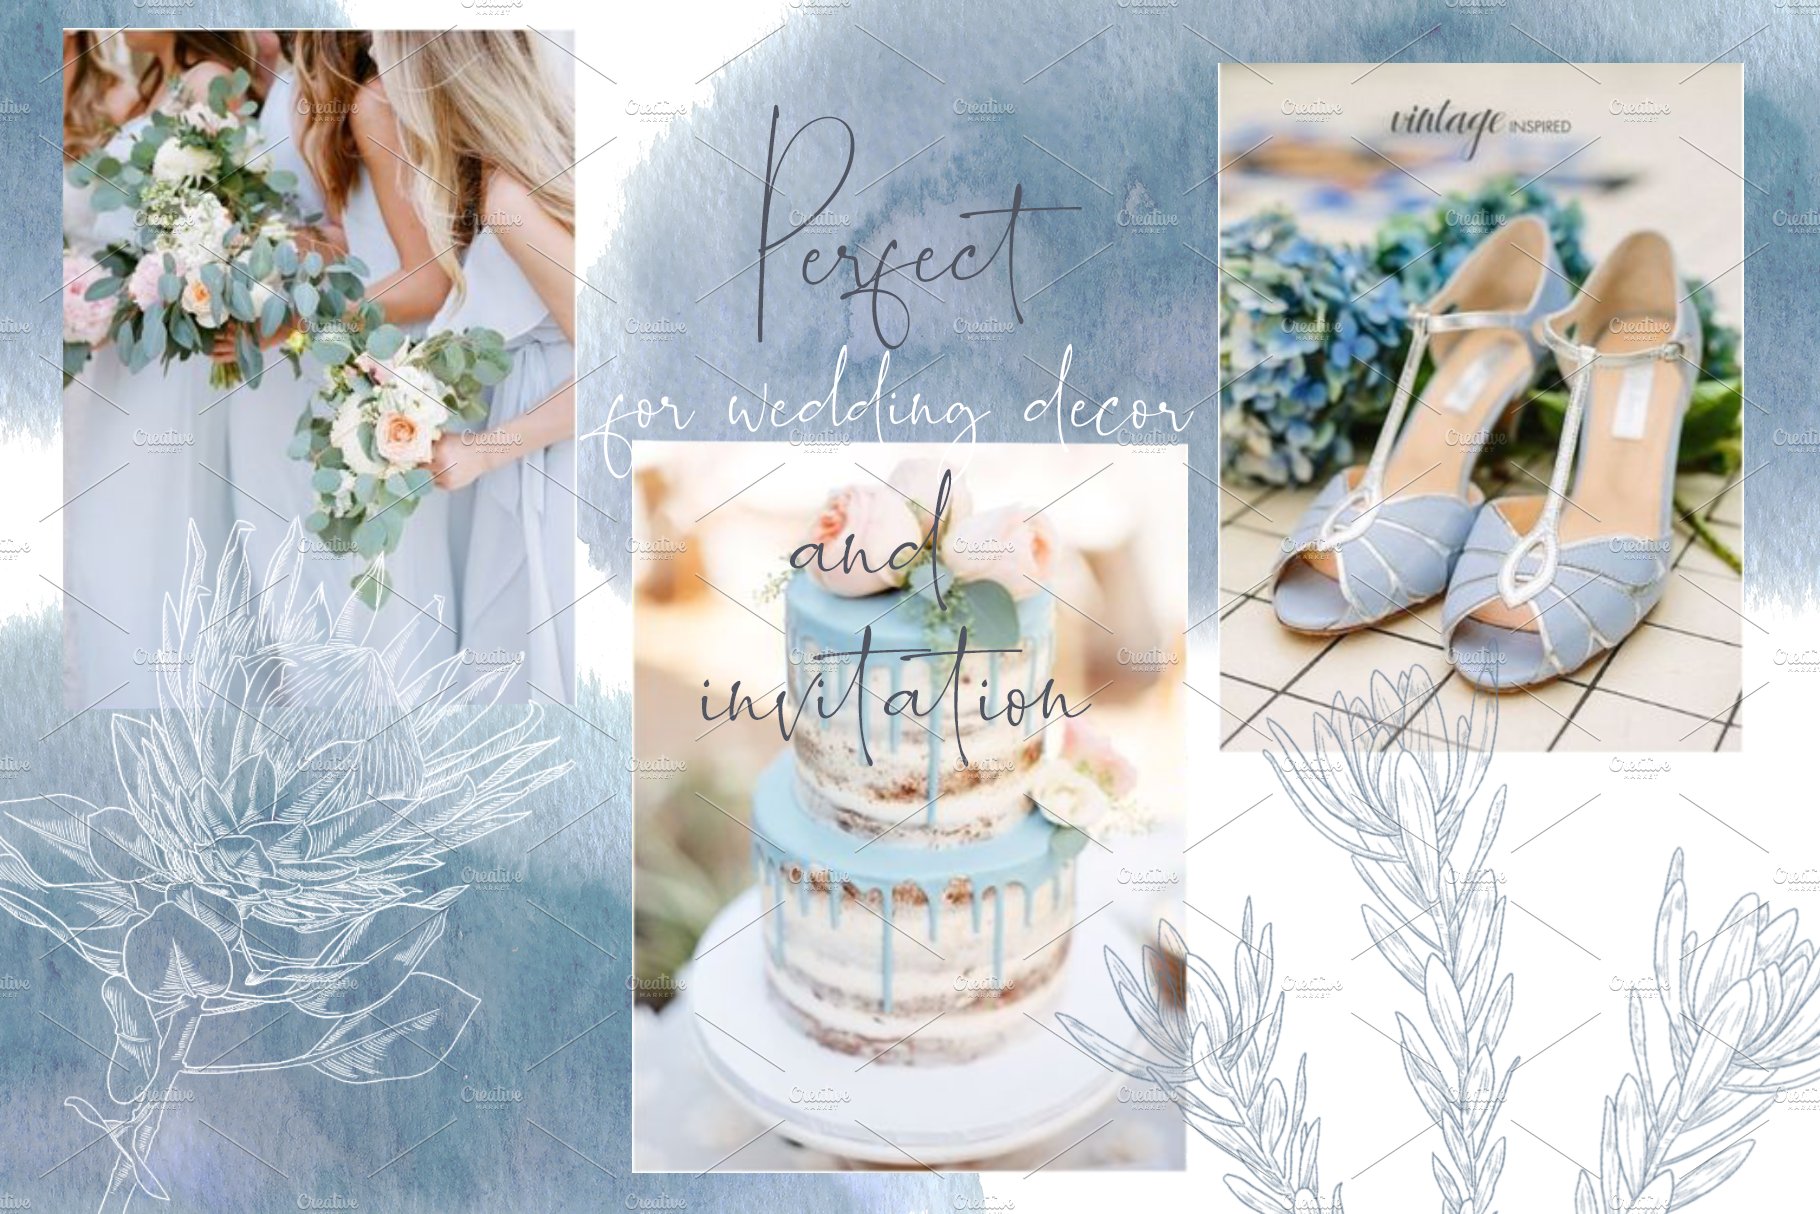 Collage of photos of a bride and her wedding cake.